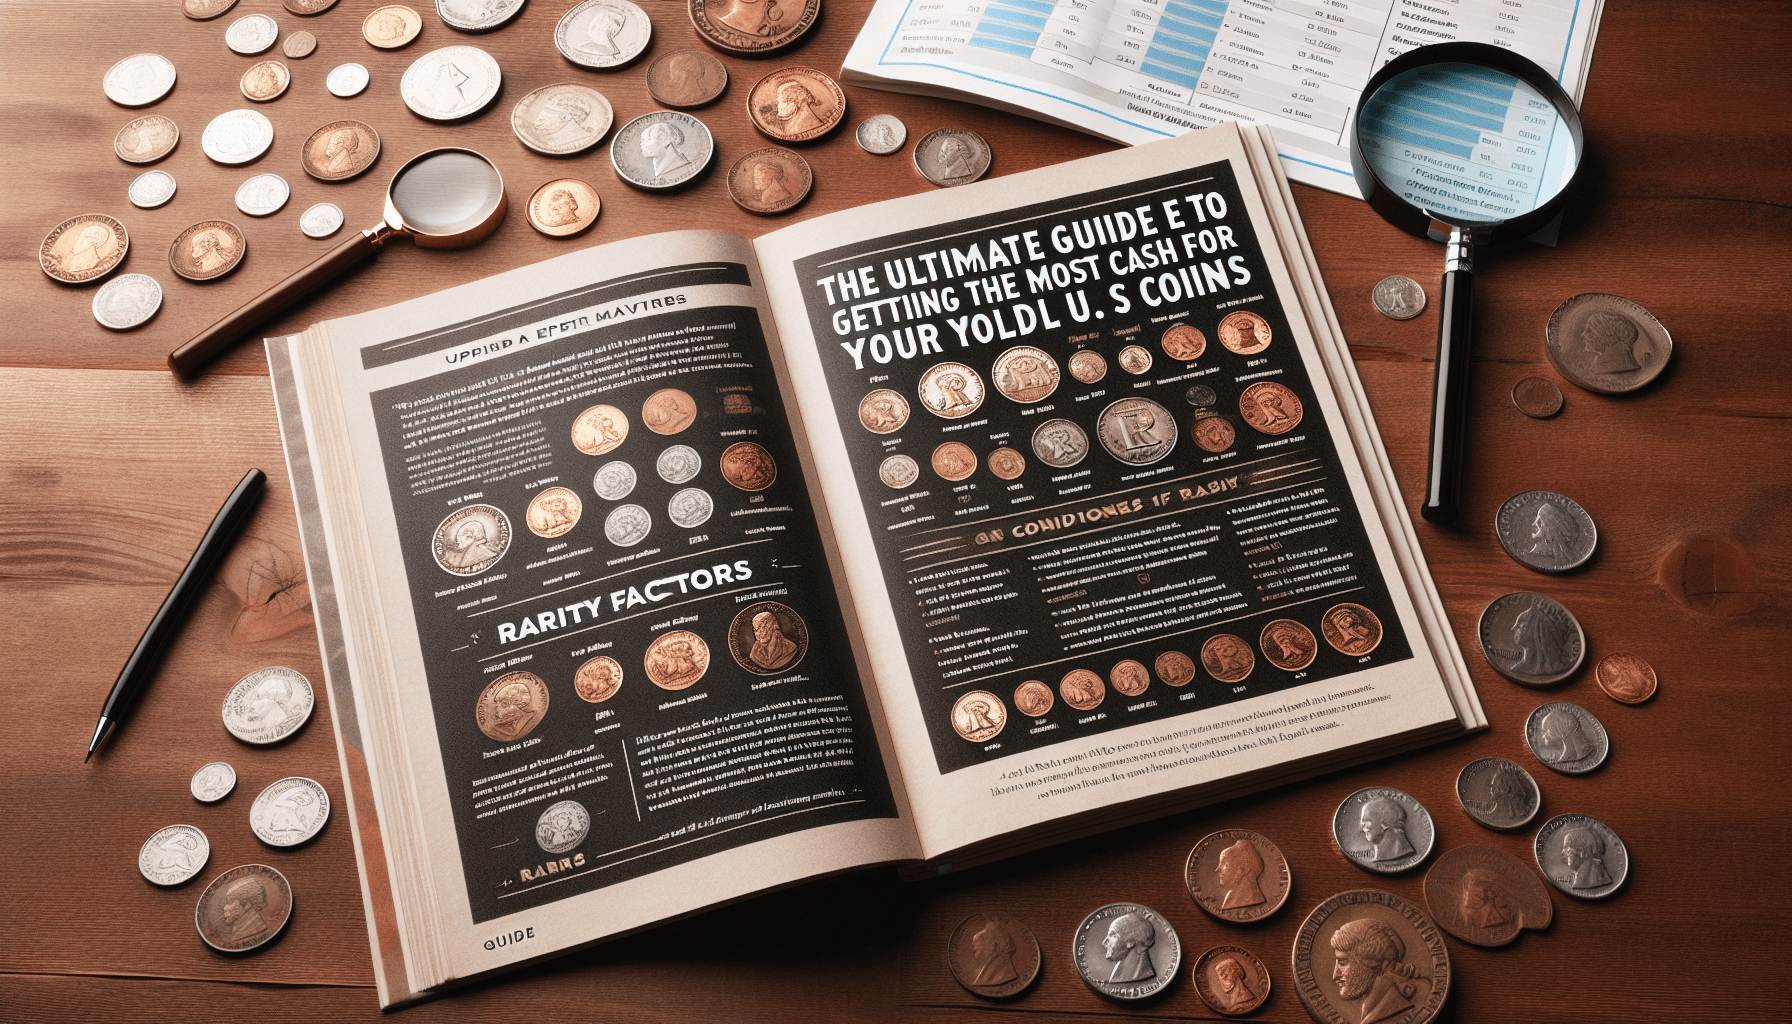 The Ultimate Guide to Getting the Most Cash for Your Old US Coins